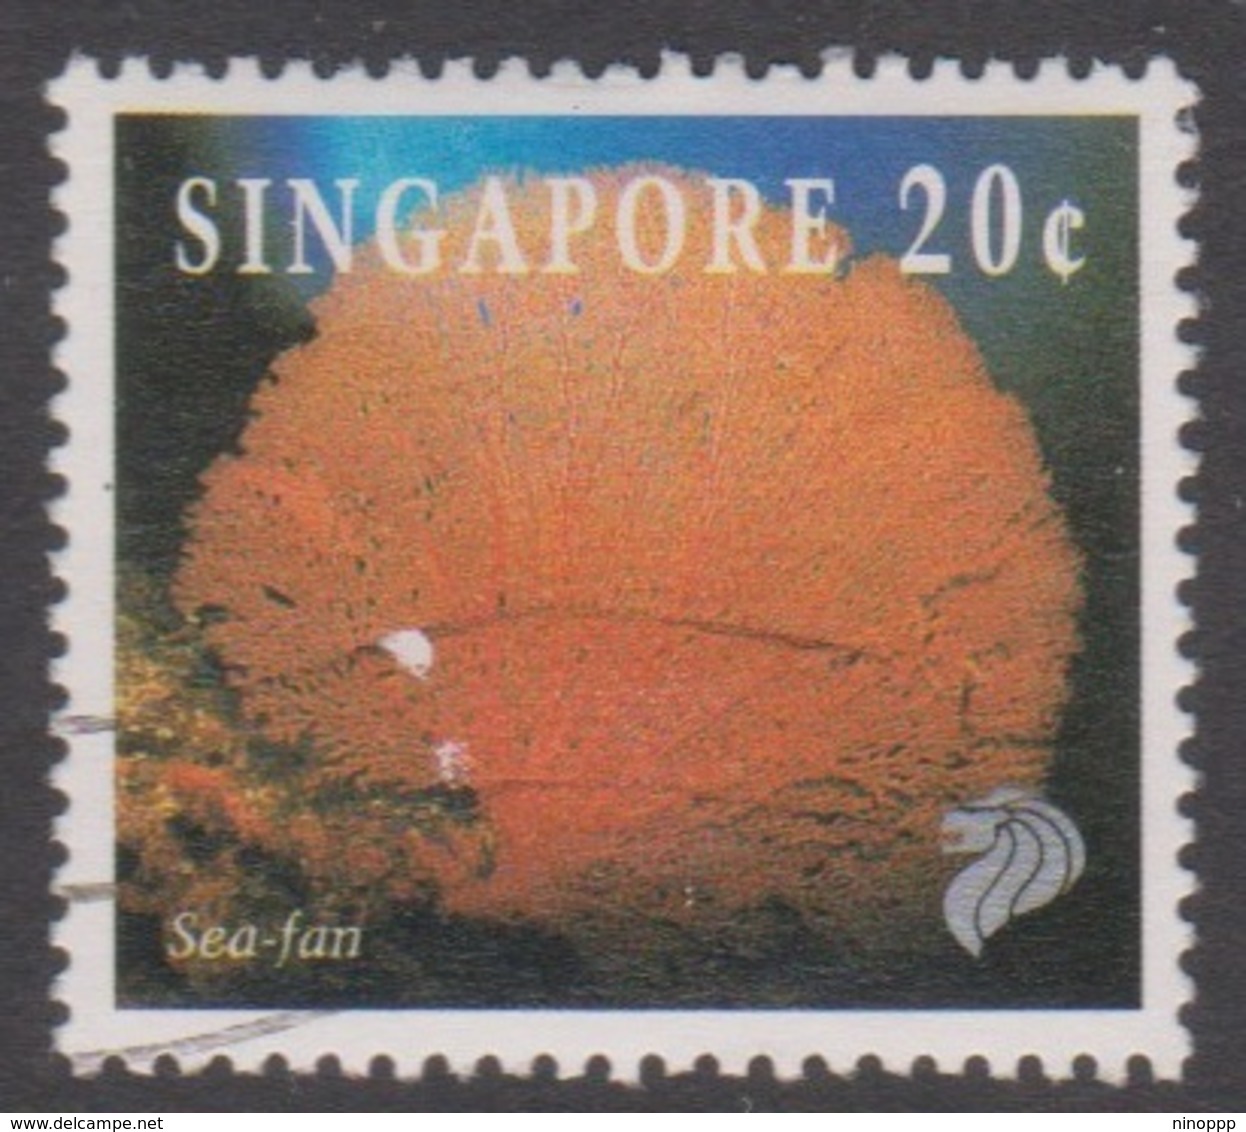 Singapore 741 1994 Corals And Reef Life,20c Sea Fan, Used - Singapore (1959-...)